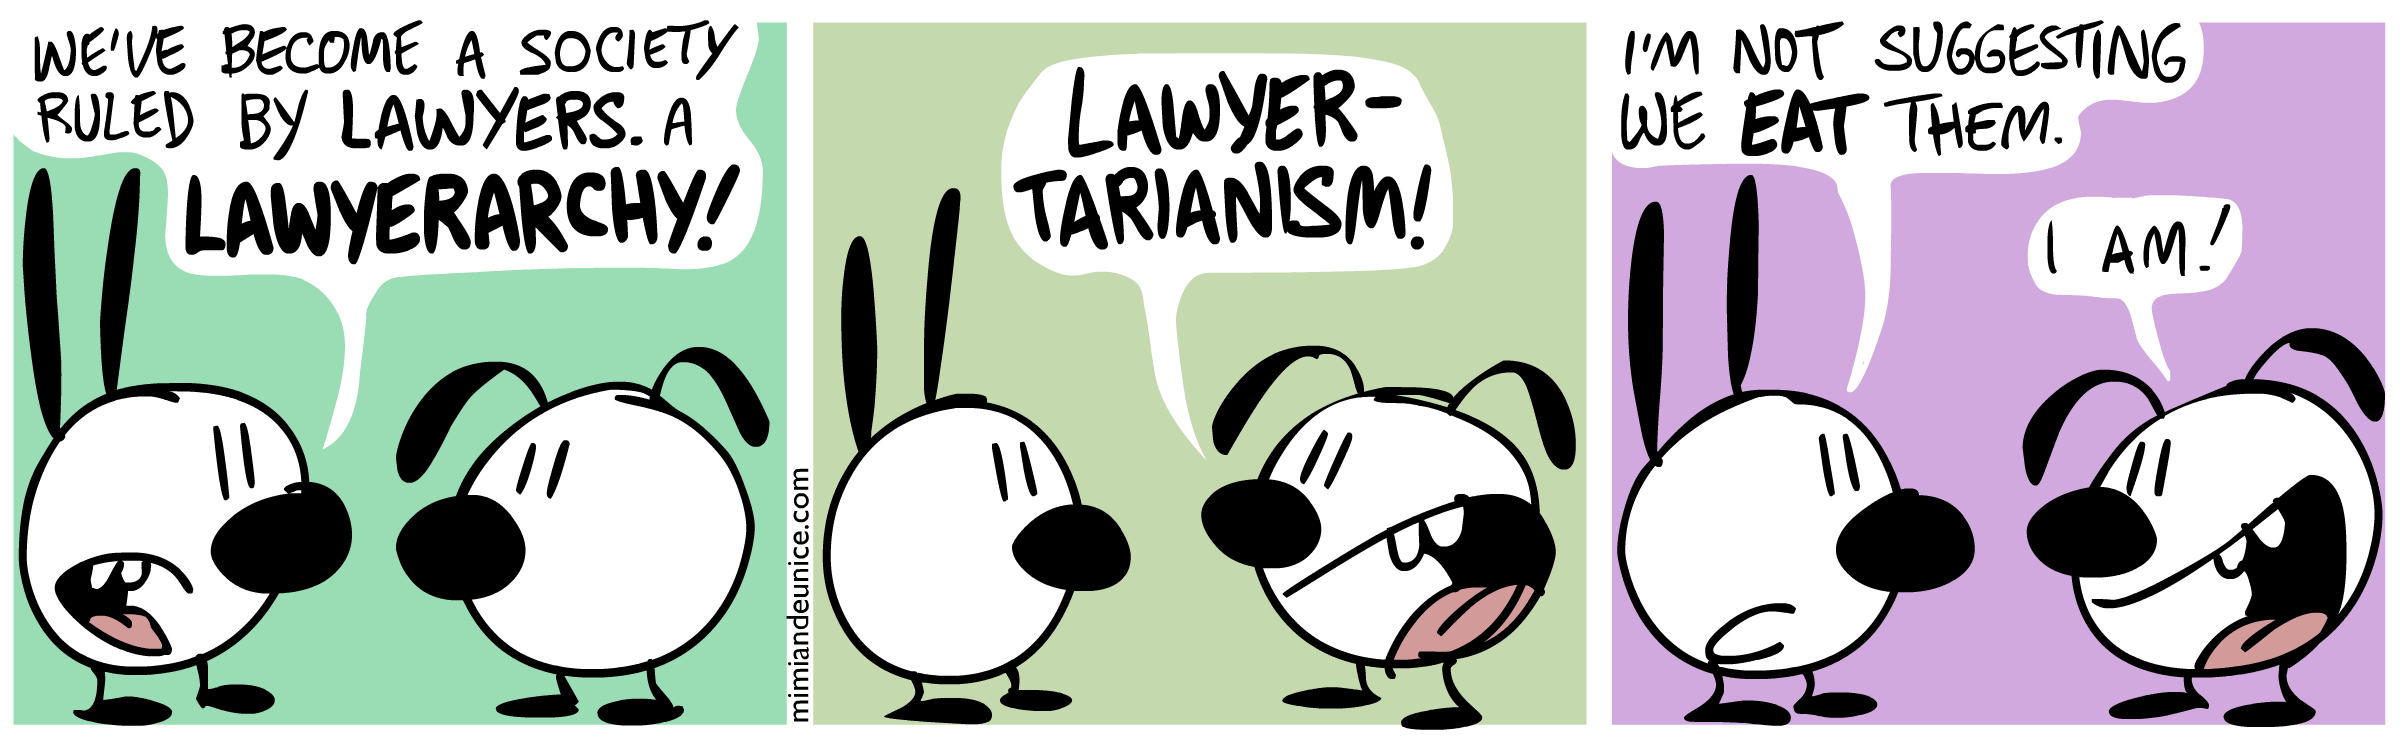 (Comic) Mimi: "We've become a society ruled by lawyers! A Lawyerarchy!" Eunice: "Lawyertarianism!" Mimi: "I'm not suggesting we *eat* them." Eunice: "I am!"